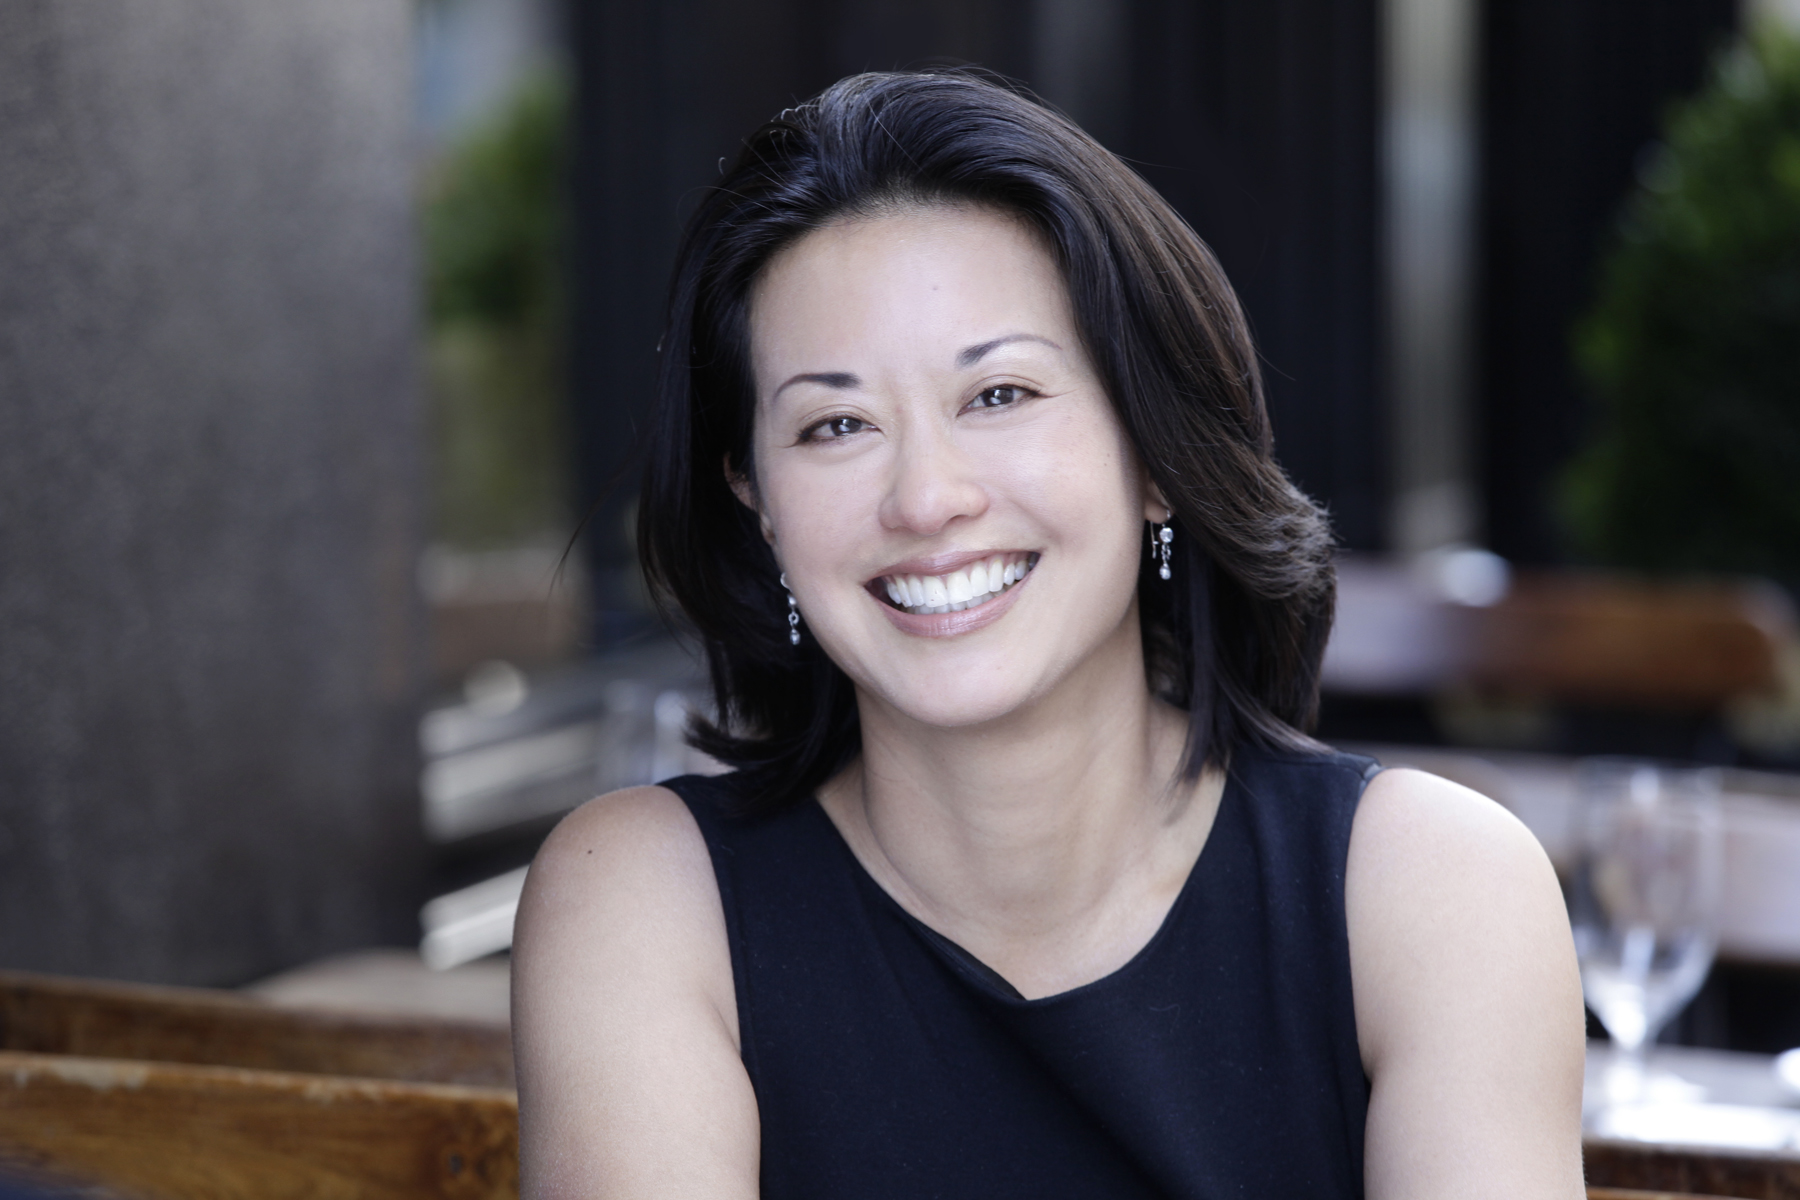 Tern Welcomes Julia Sze to the Board of Directors